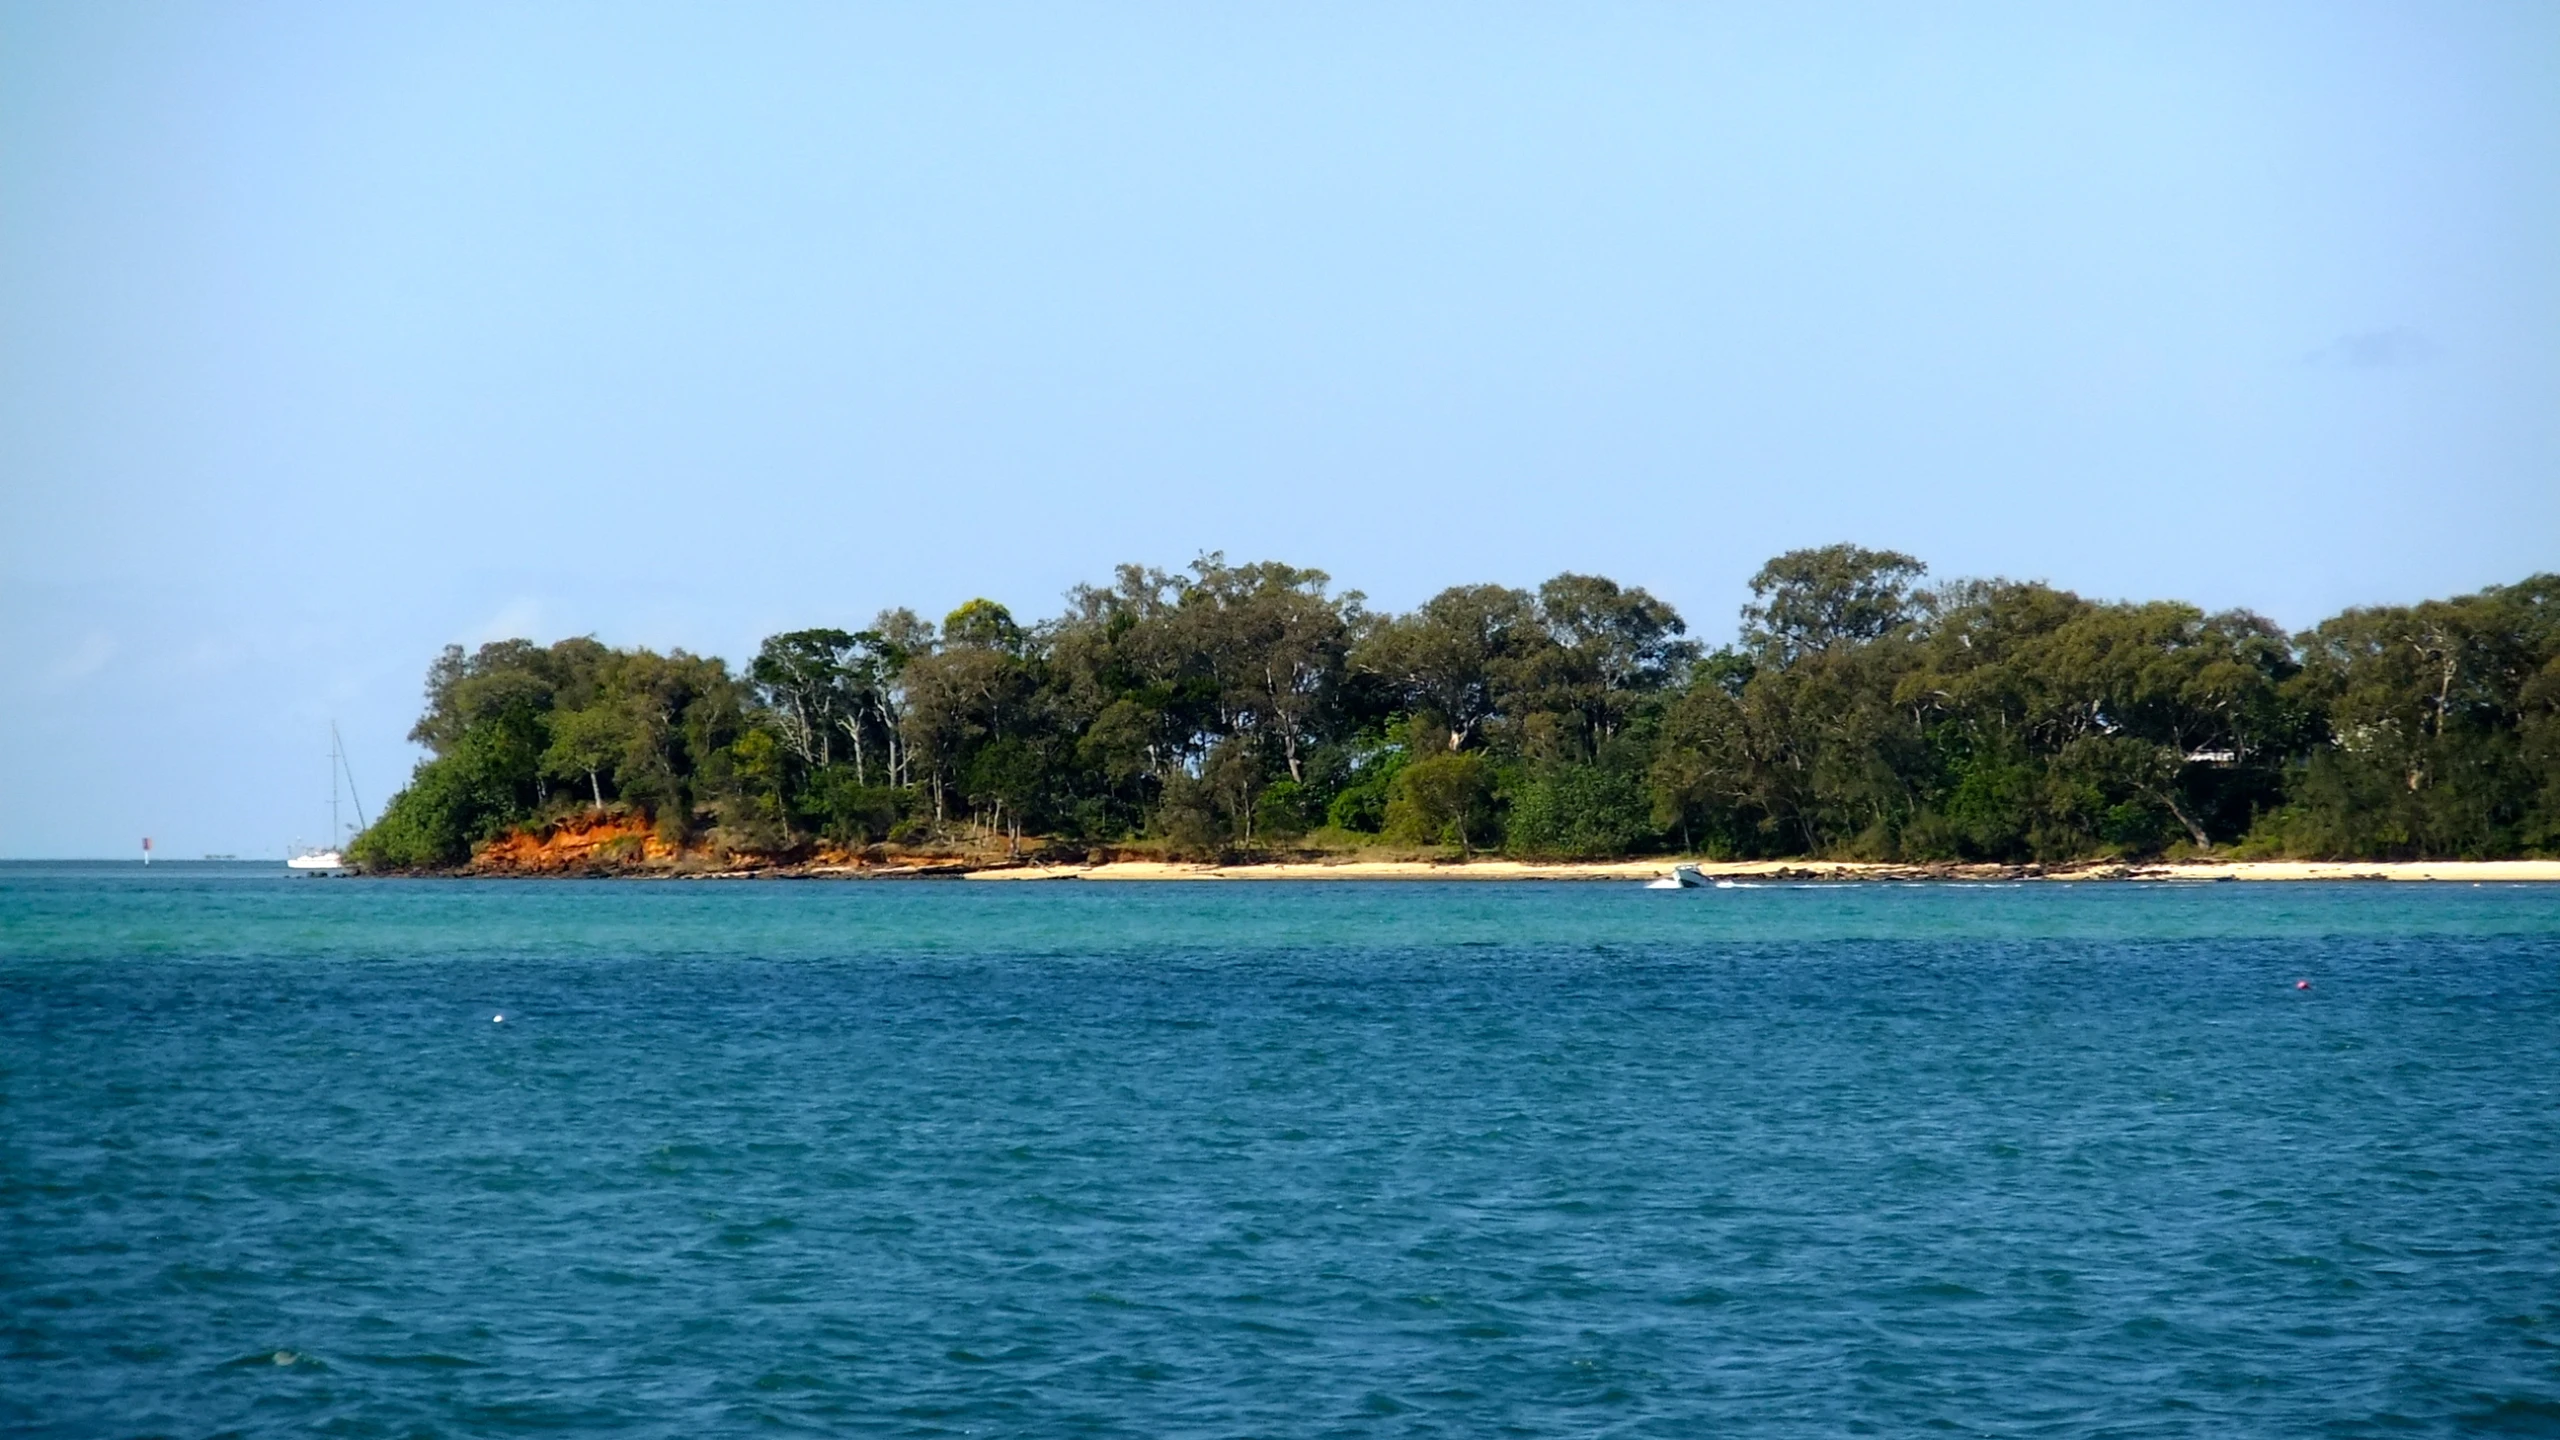 a small island with several trees in the middle